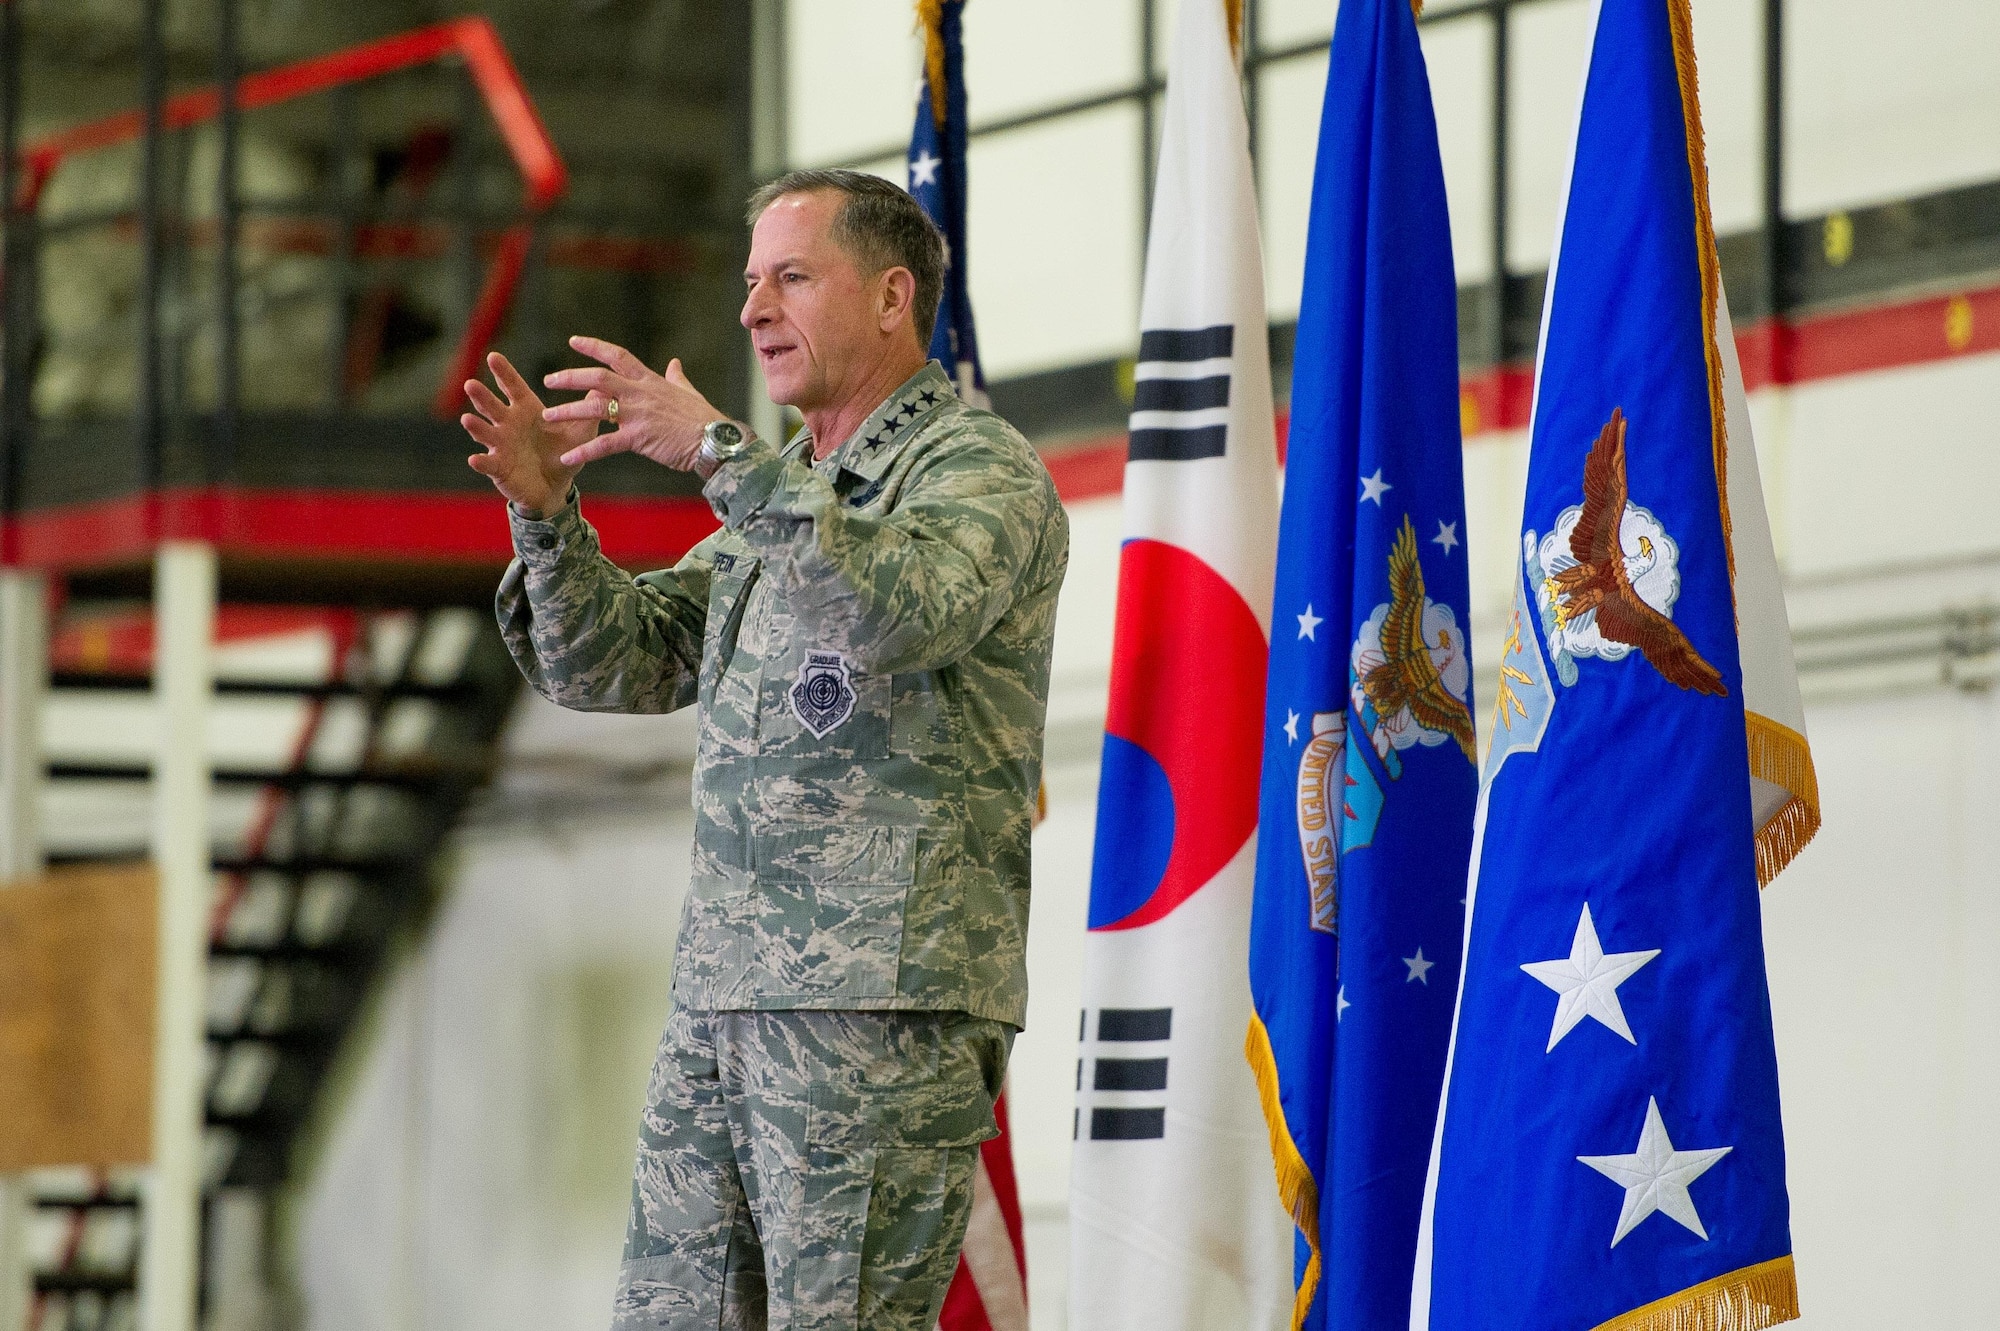 Air Force Chief of Staff Gen. David L. Goldfein speaks with Team Osan during an all-call on Osan Air Base, Republic of Korea, Oct. 31 2016. While visiting the base, Goldfein shared his priorities of revitalizing squadrons, strengthening joint leaders and teams, and multi-domain command and control. (U.S. Air Force photo by Staff Sgt. Jonathan Steffen)